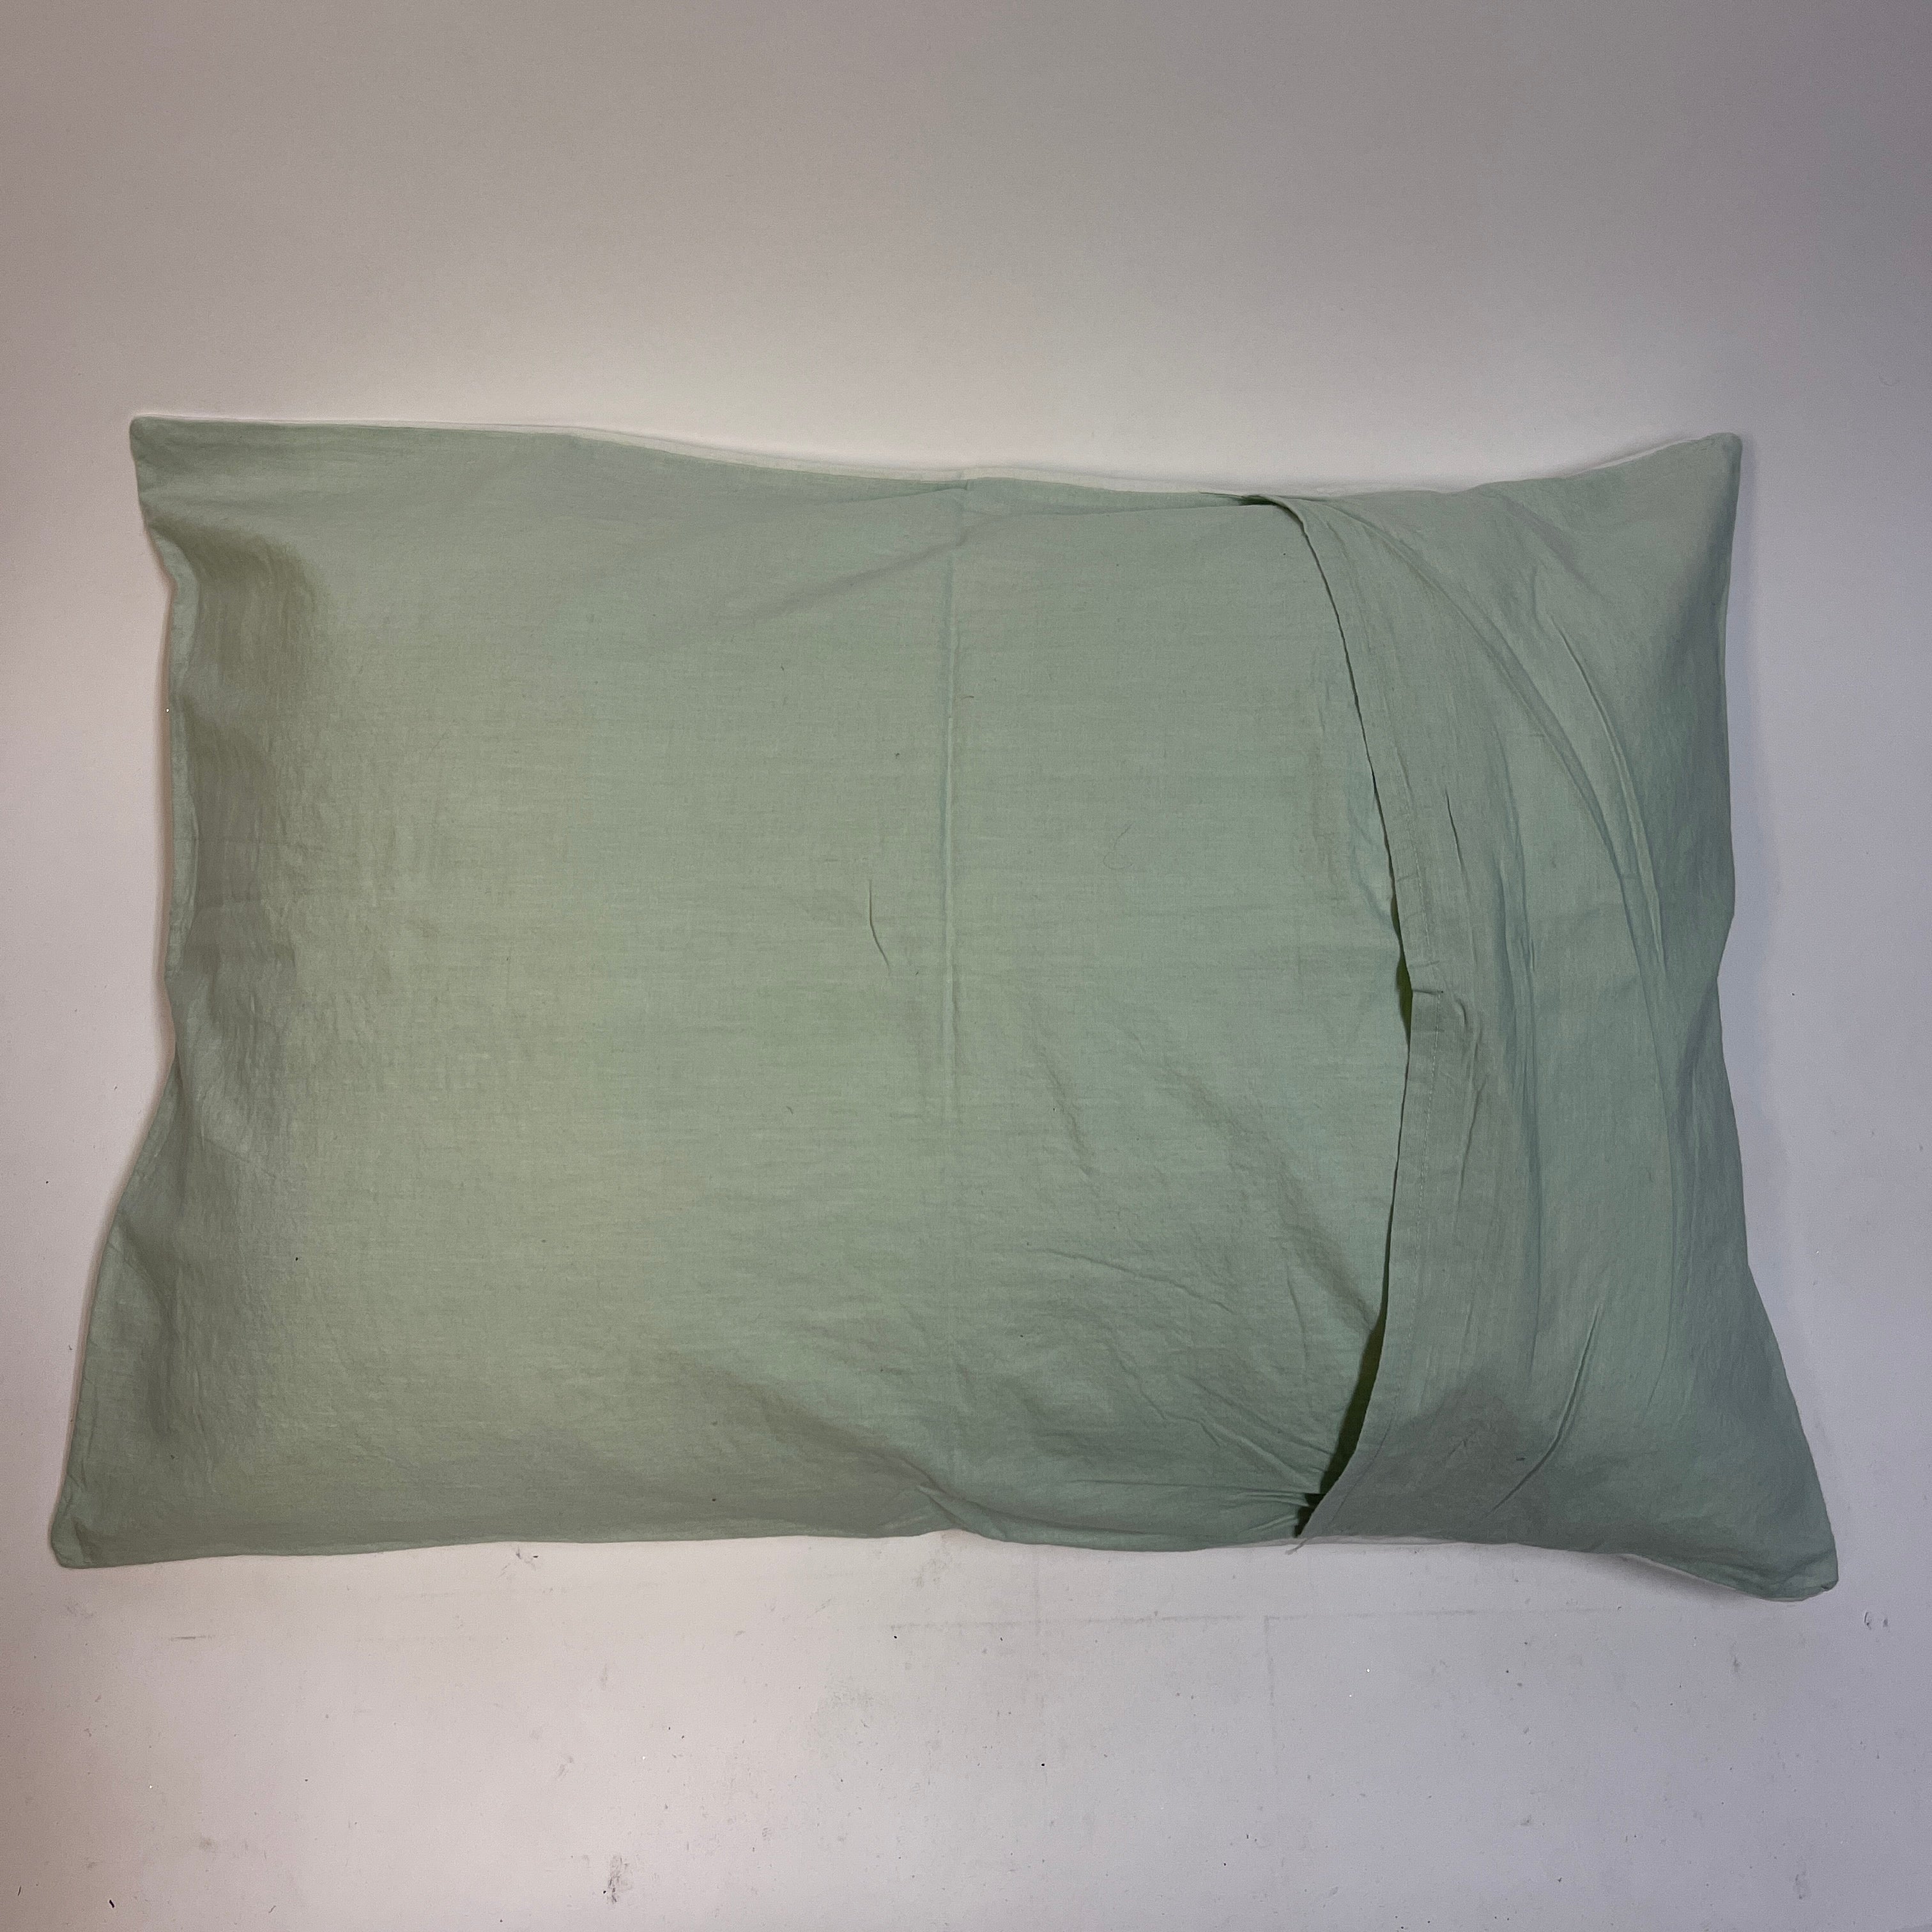 Pillow 1 - Vintage India NYC